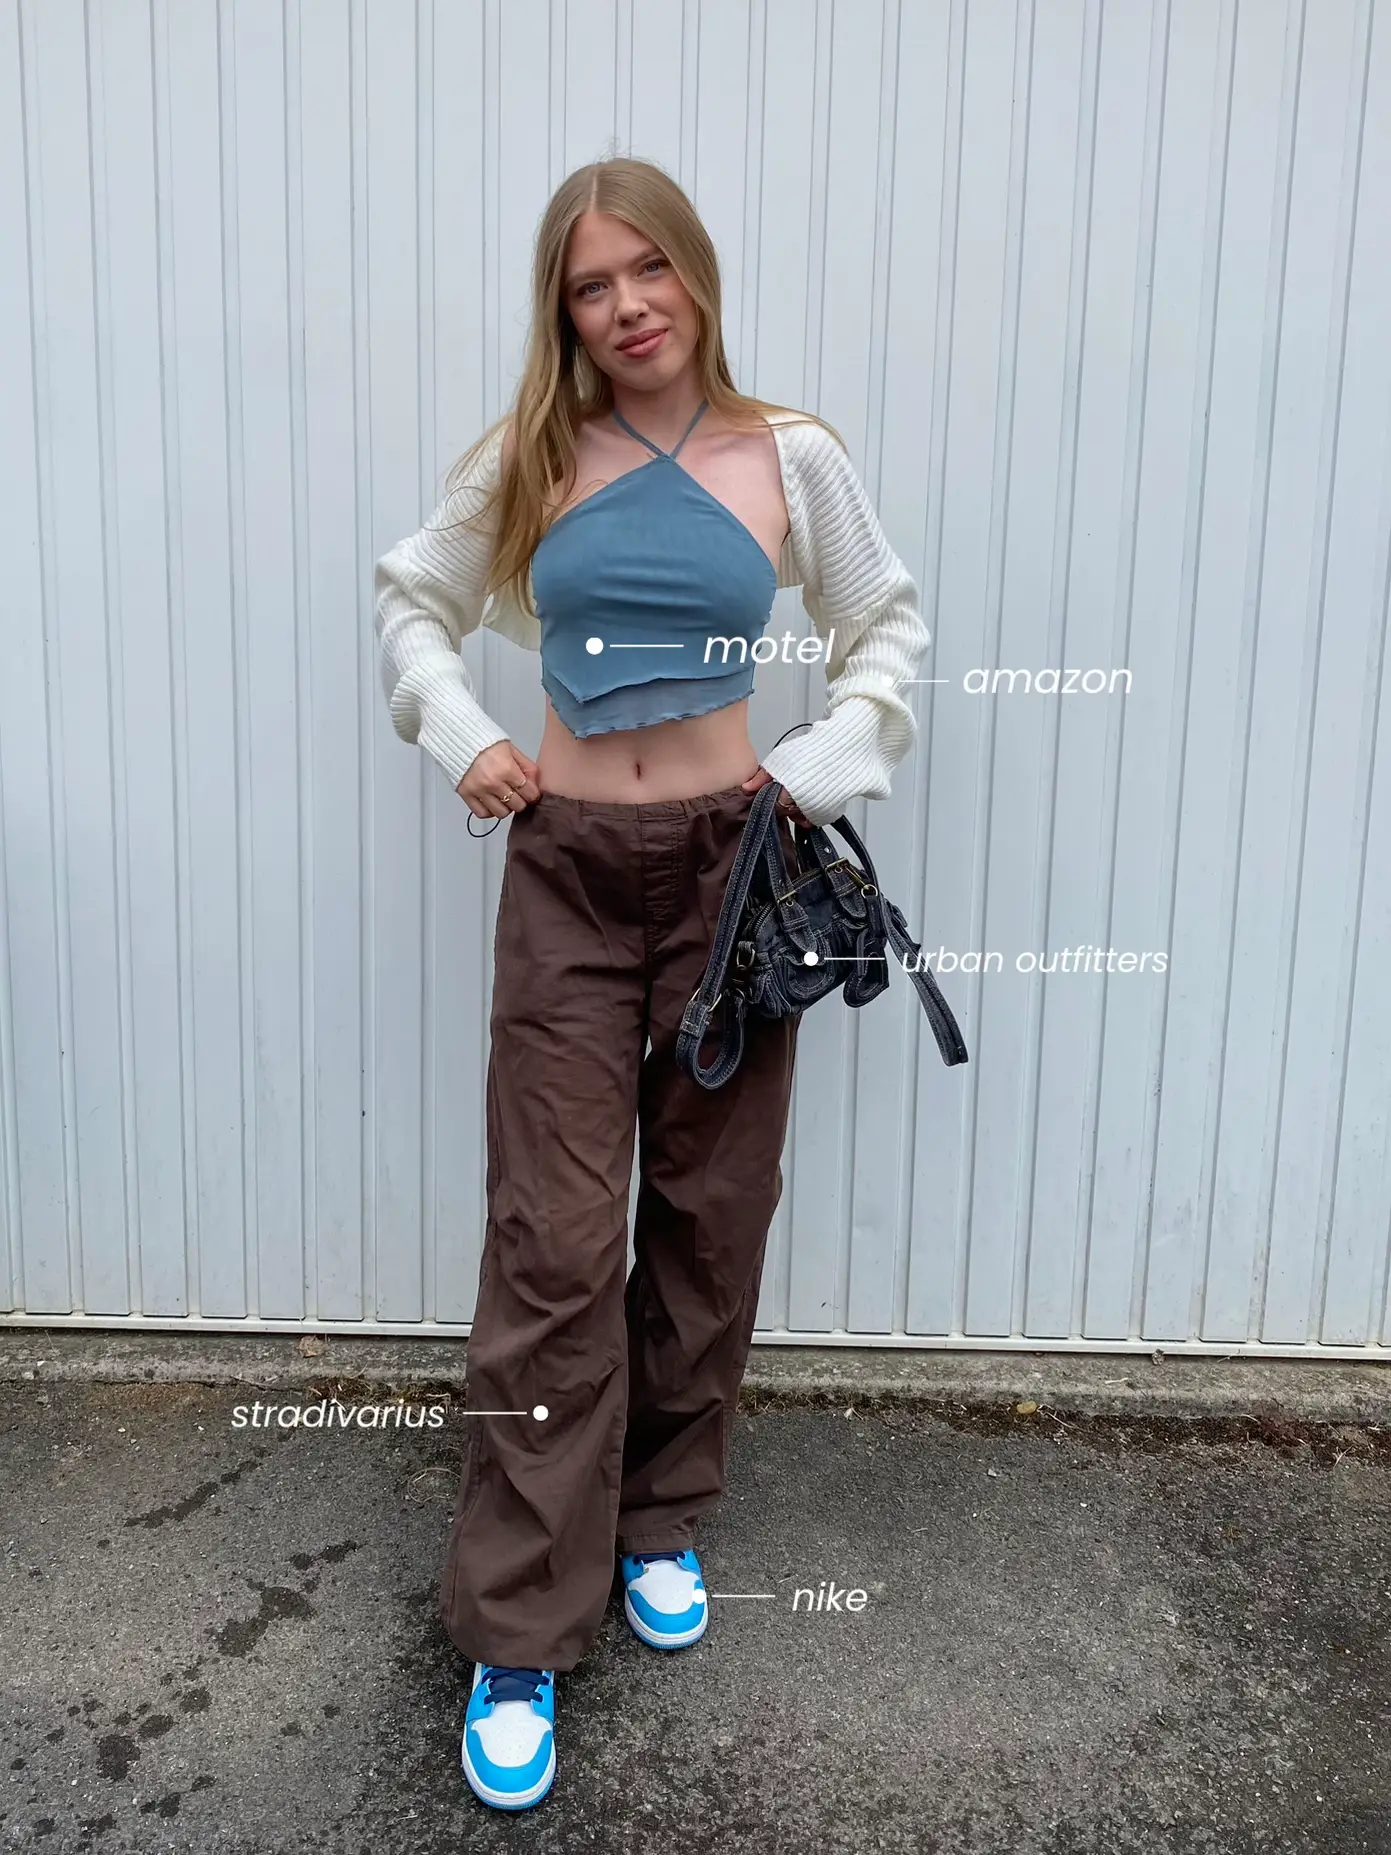 Brown Outfit Lookbook 🤎☕️  Gallery posted by BeingIsabella